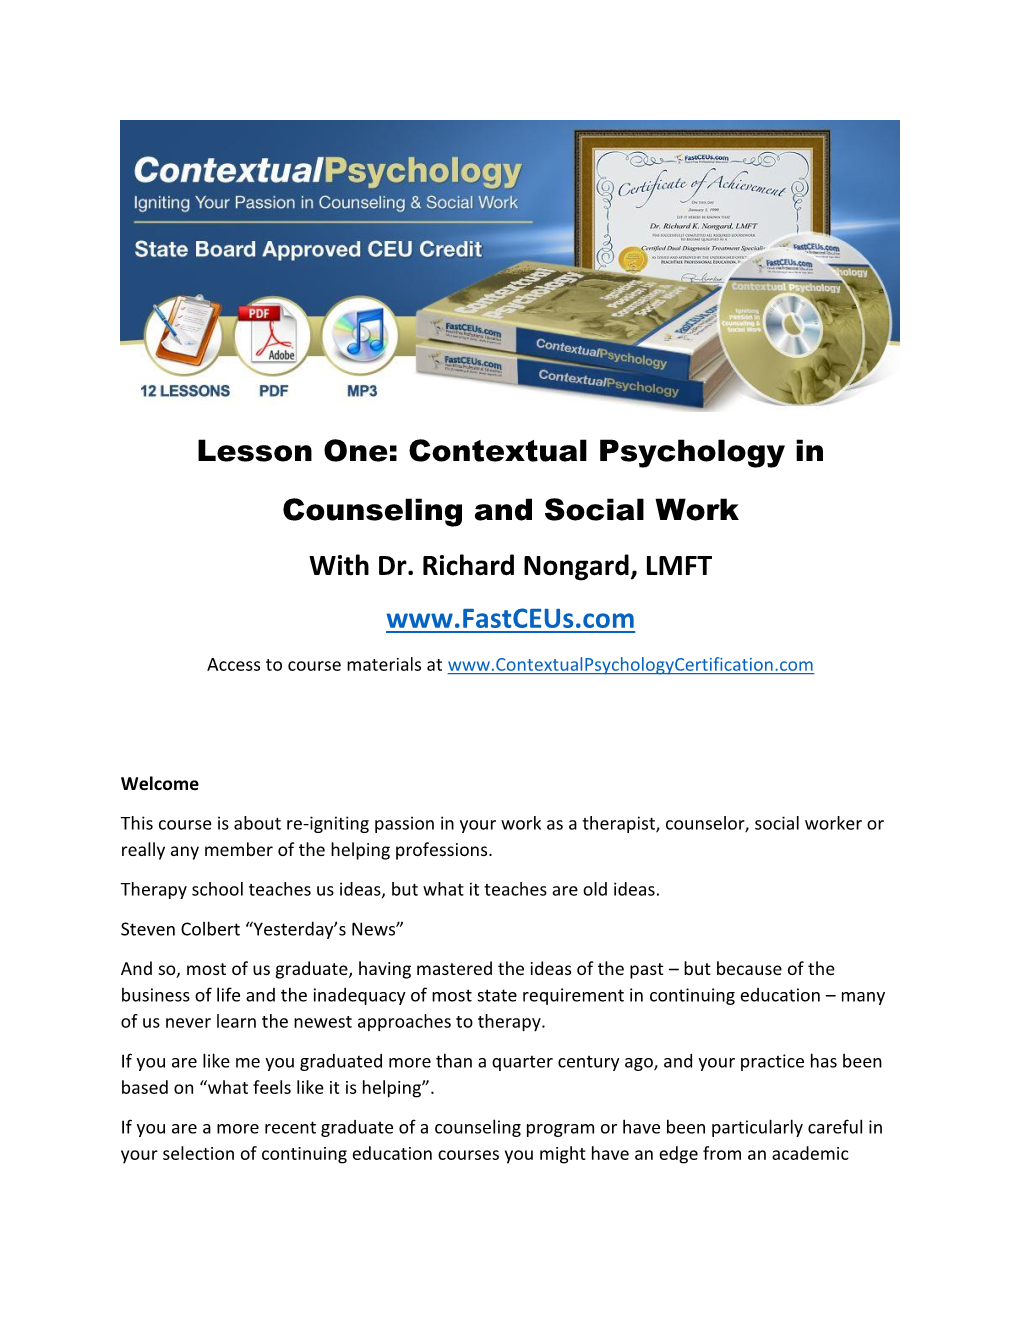 Lesson One: Contextual Psychology in Counseling and Social Work with Dr